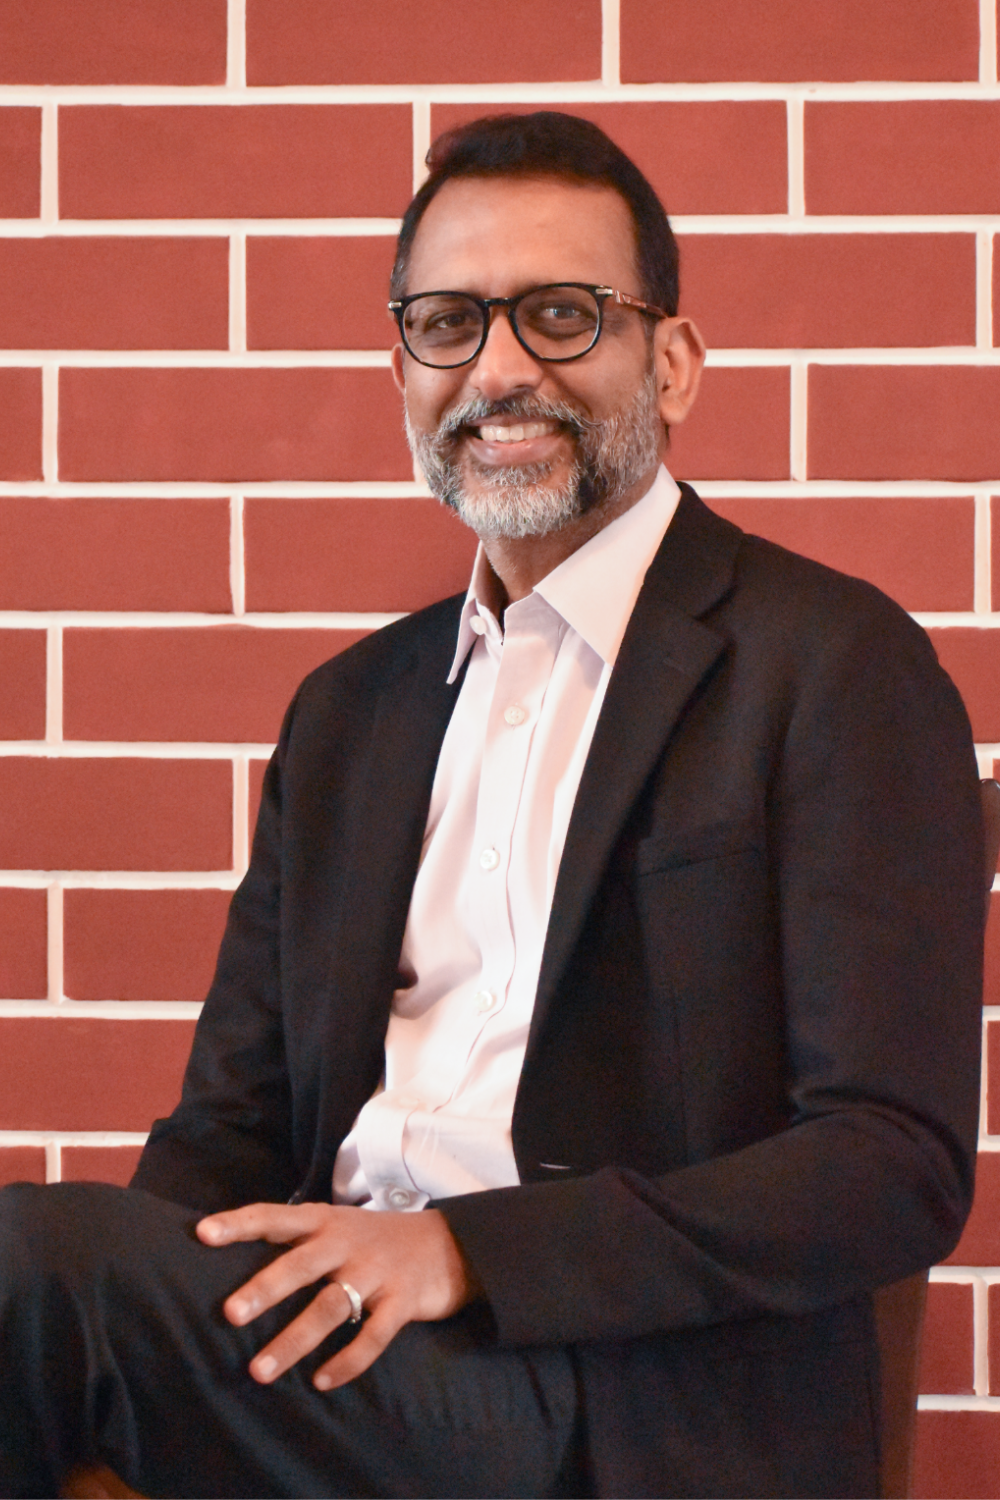 Rajeev Baphna founder and CEO of Analyttica and leaps